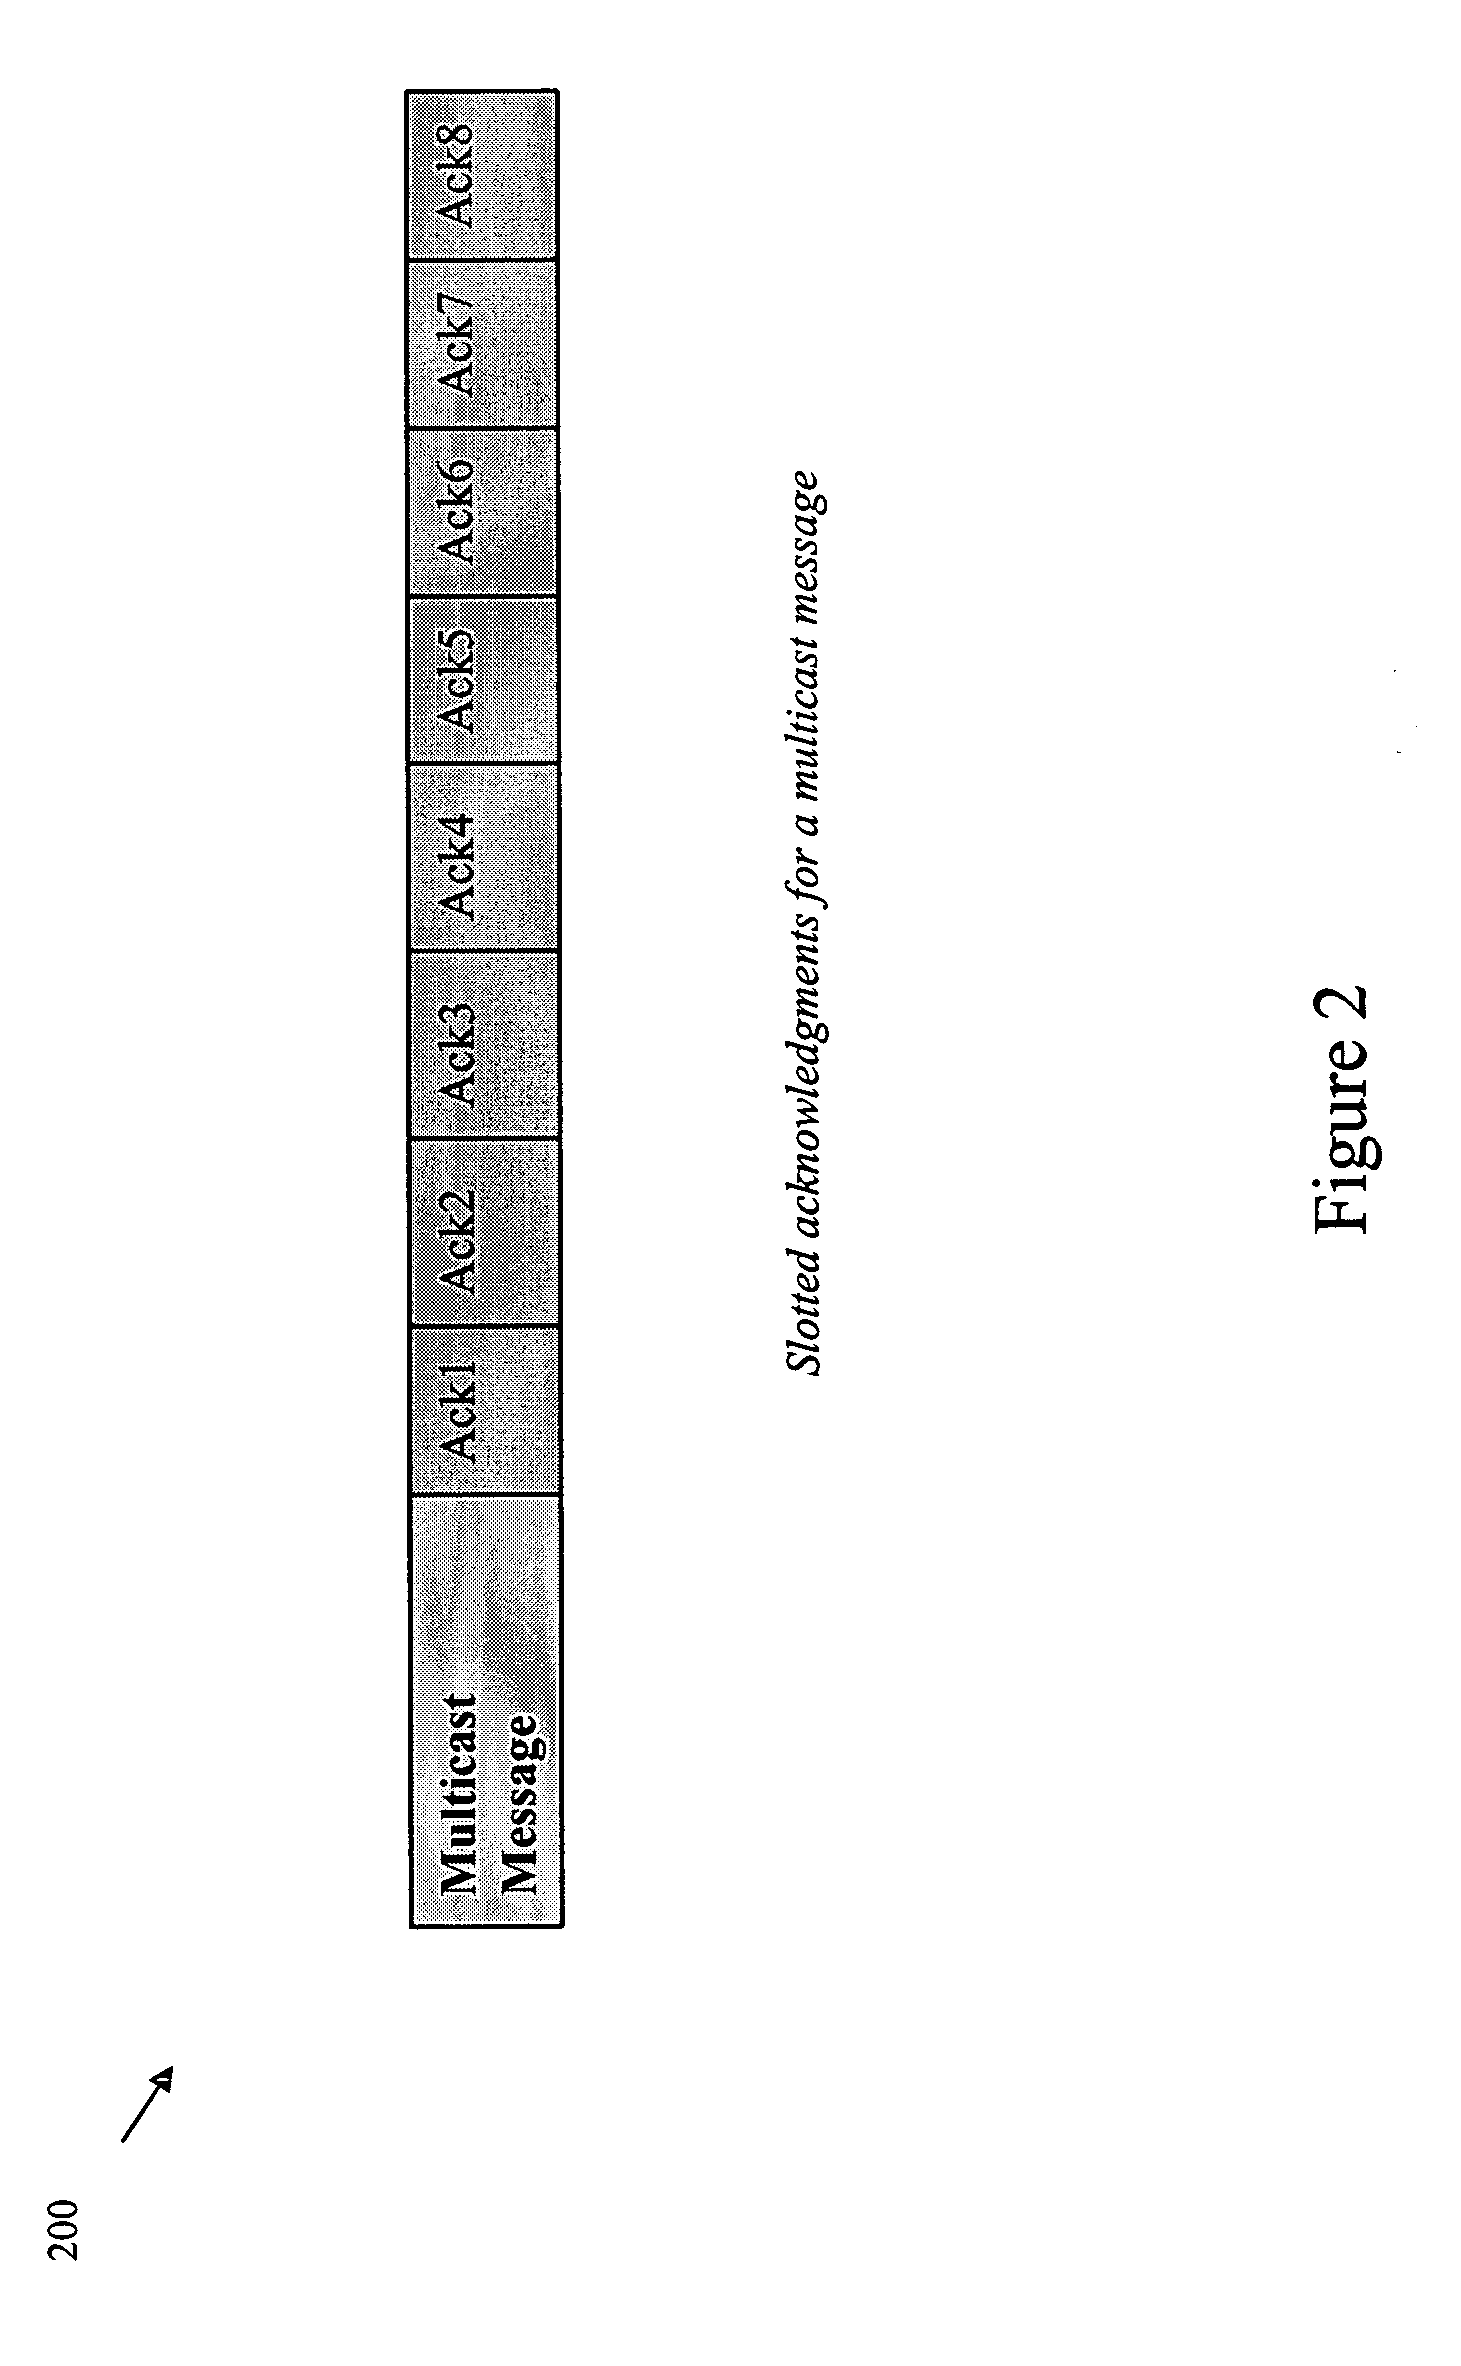 Method and system for providing acknowledged broadcast and multicast communication